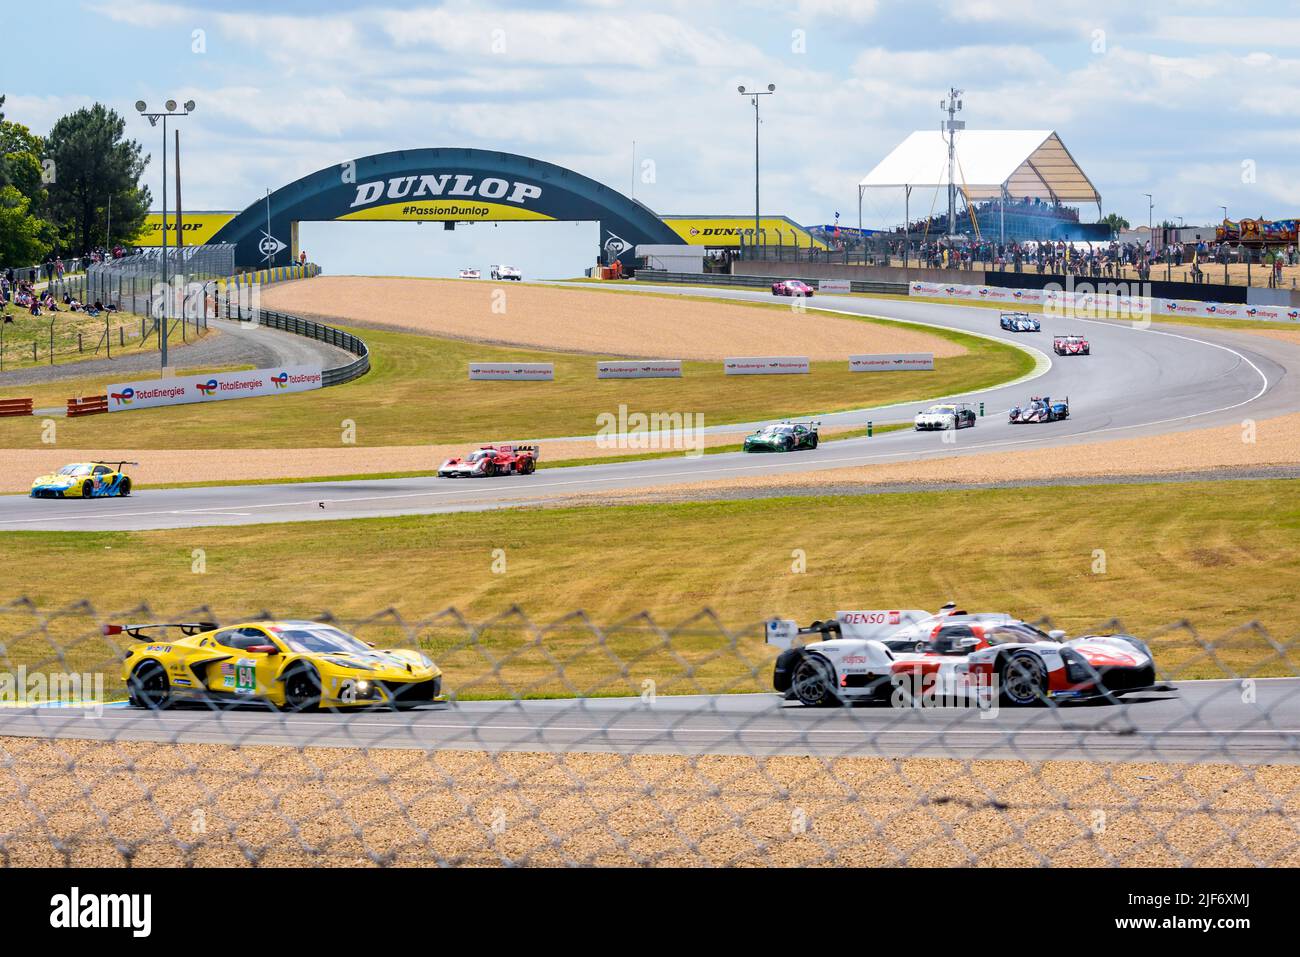 Race cars pass under the Dunlop footbridge and drive down the turns on the Circuit de la Sarthe racetrack during the 24 hours of Le Mans. Stock Photo